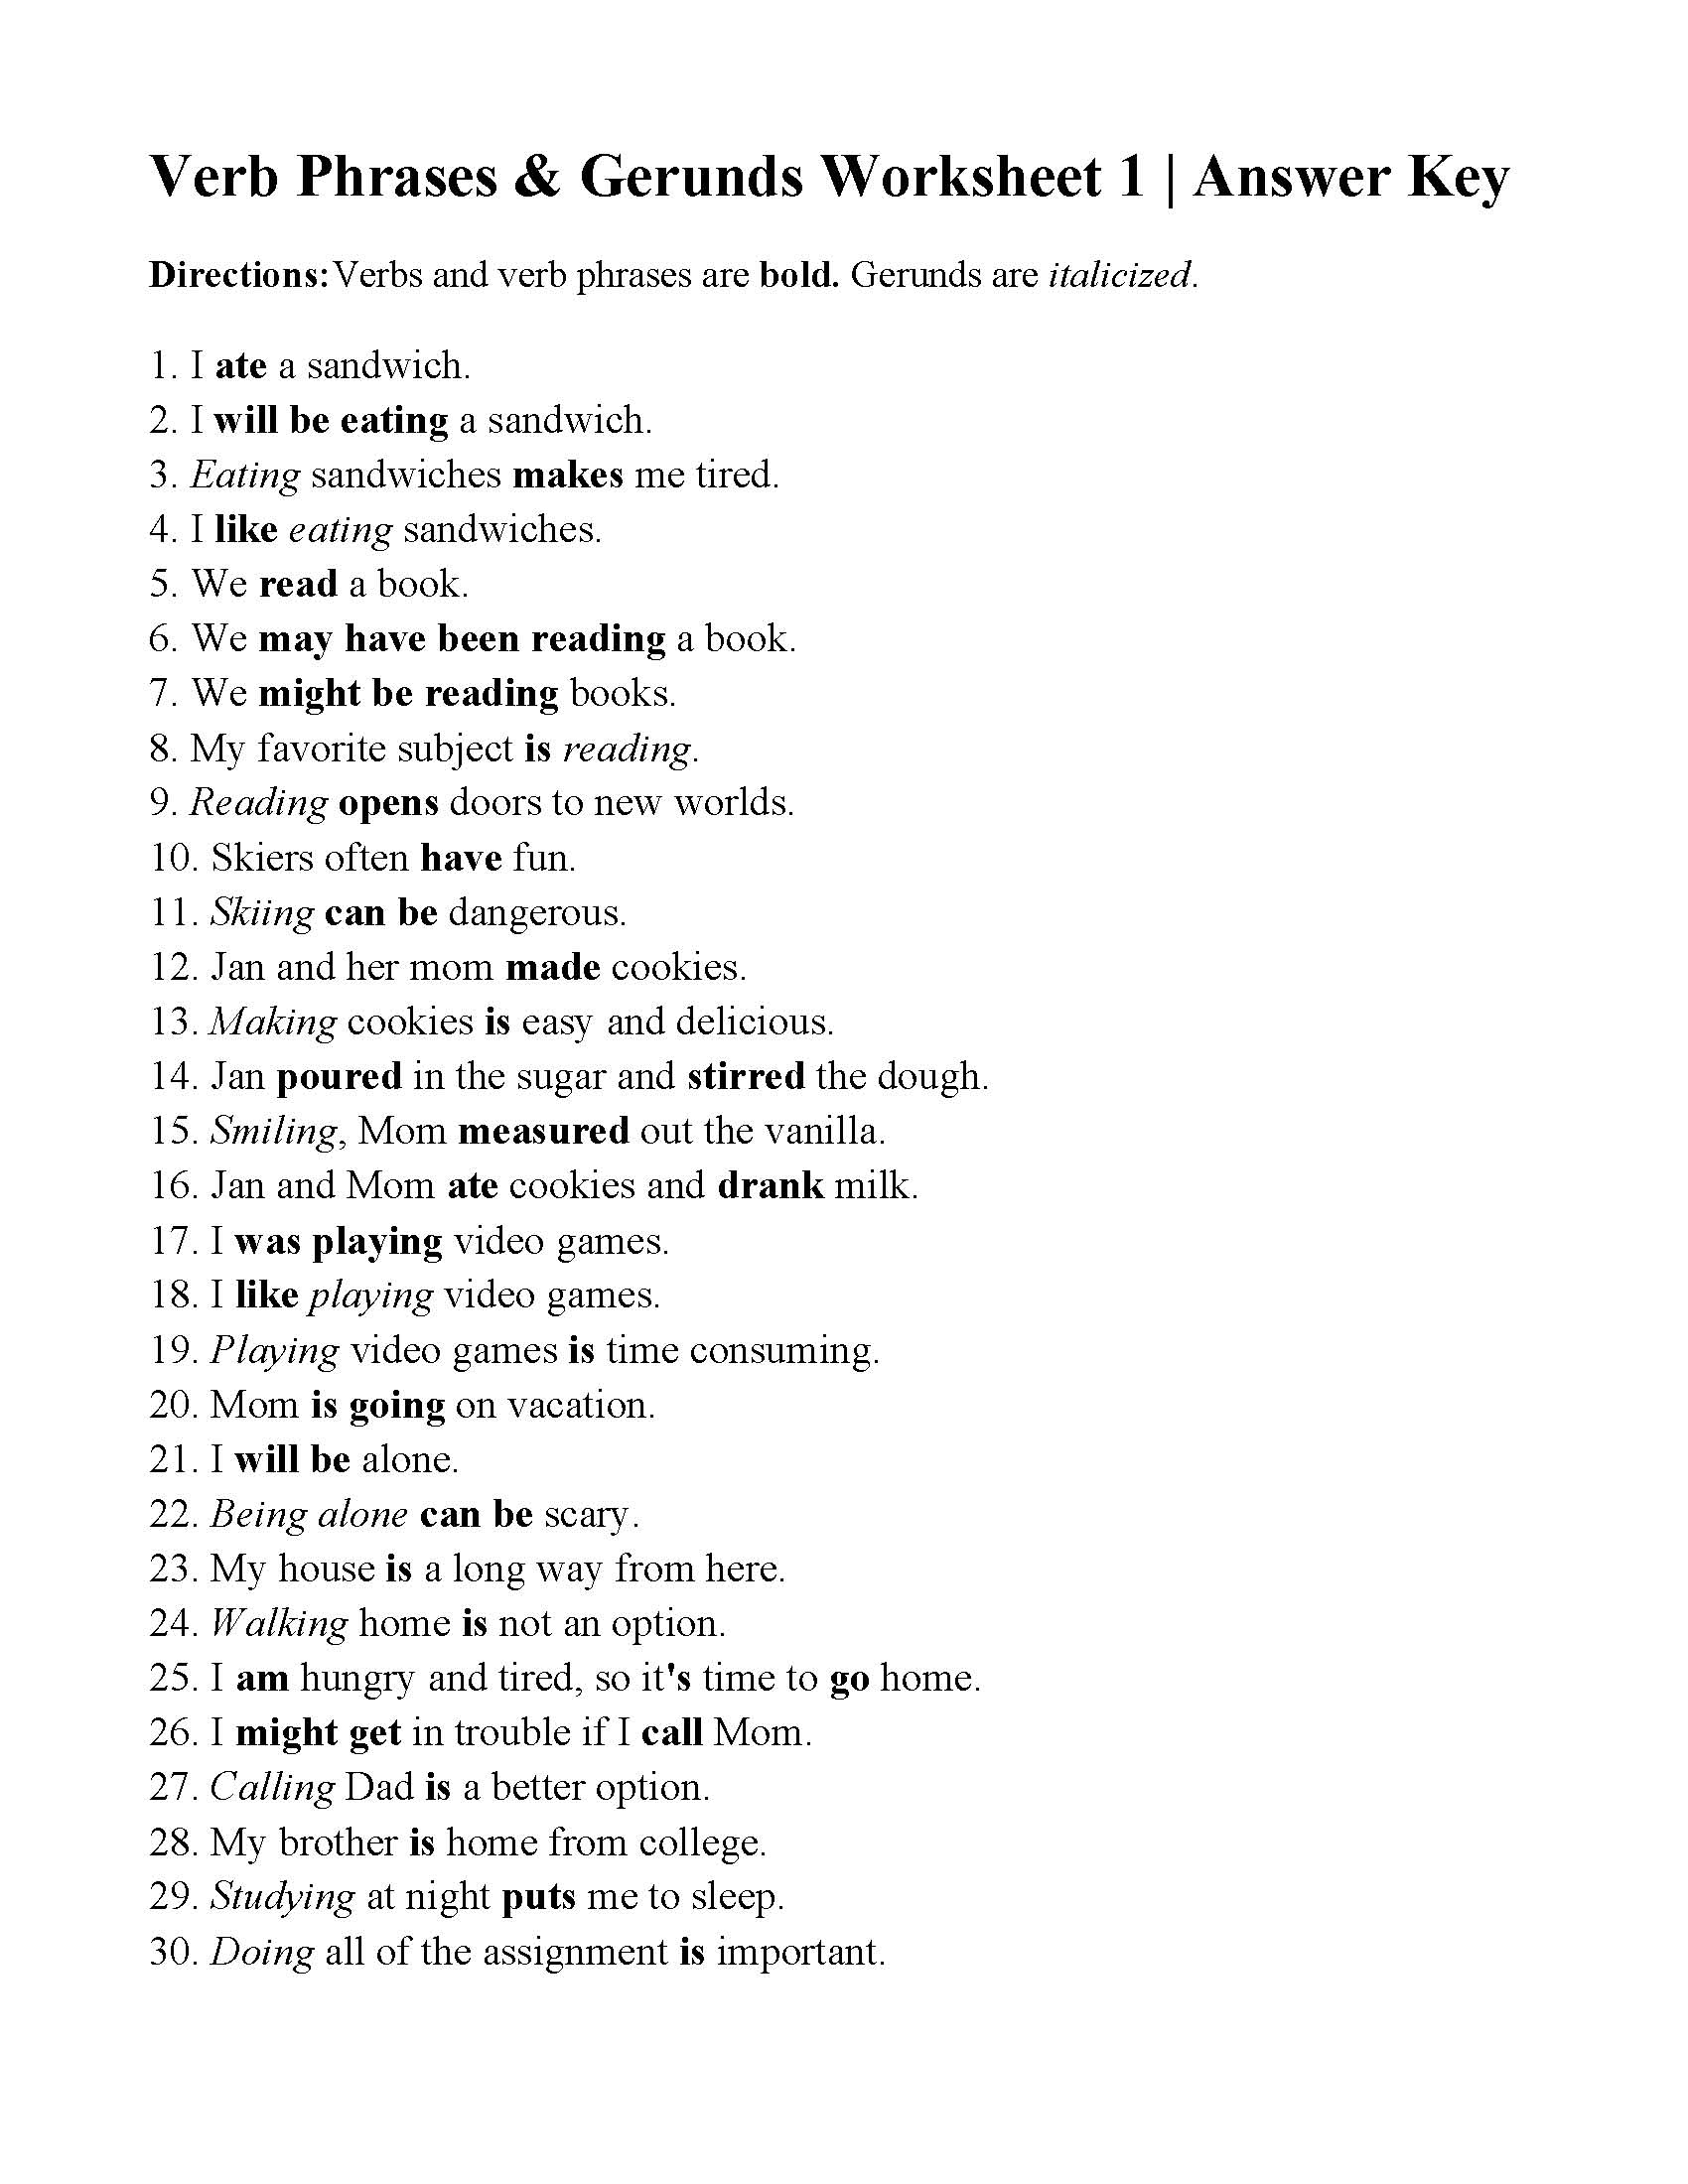 This is the answer key for the Verbs, Verbs of Being, and Gerunds Worksheet .